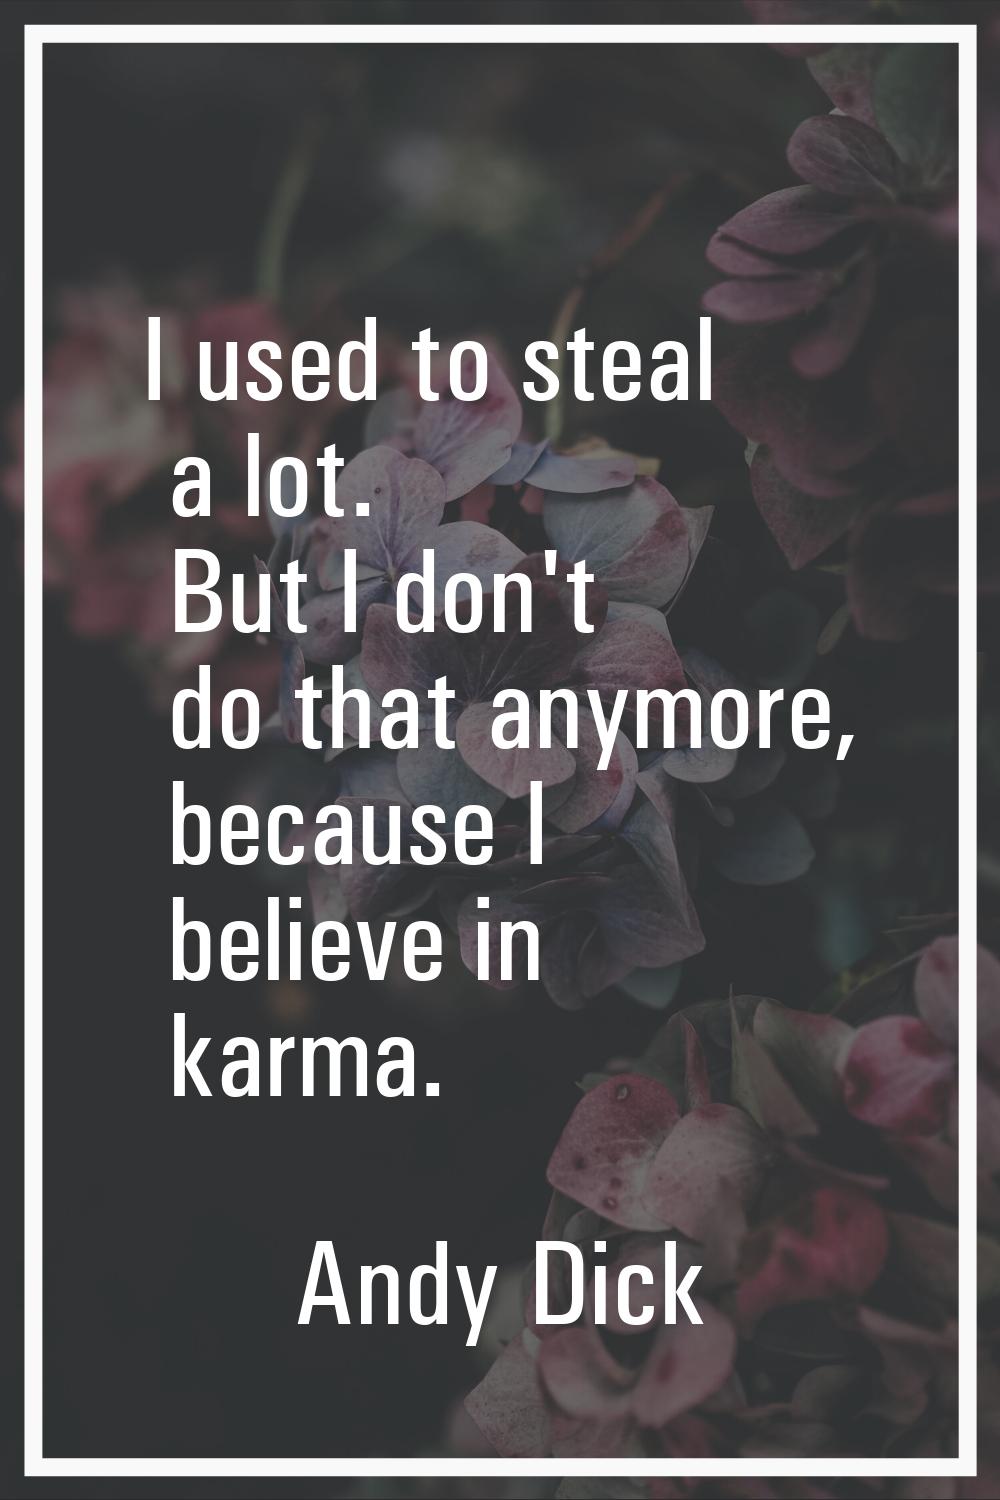 I used to steal a lot. But I don't do that anymore, because I believe in karma.